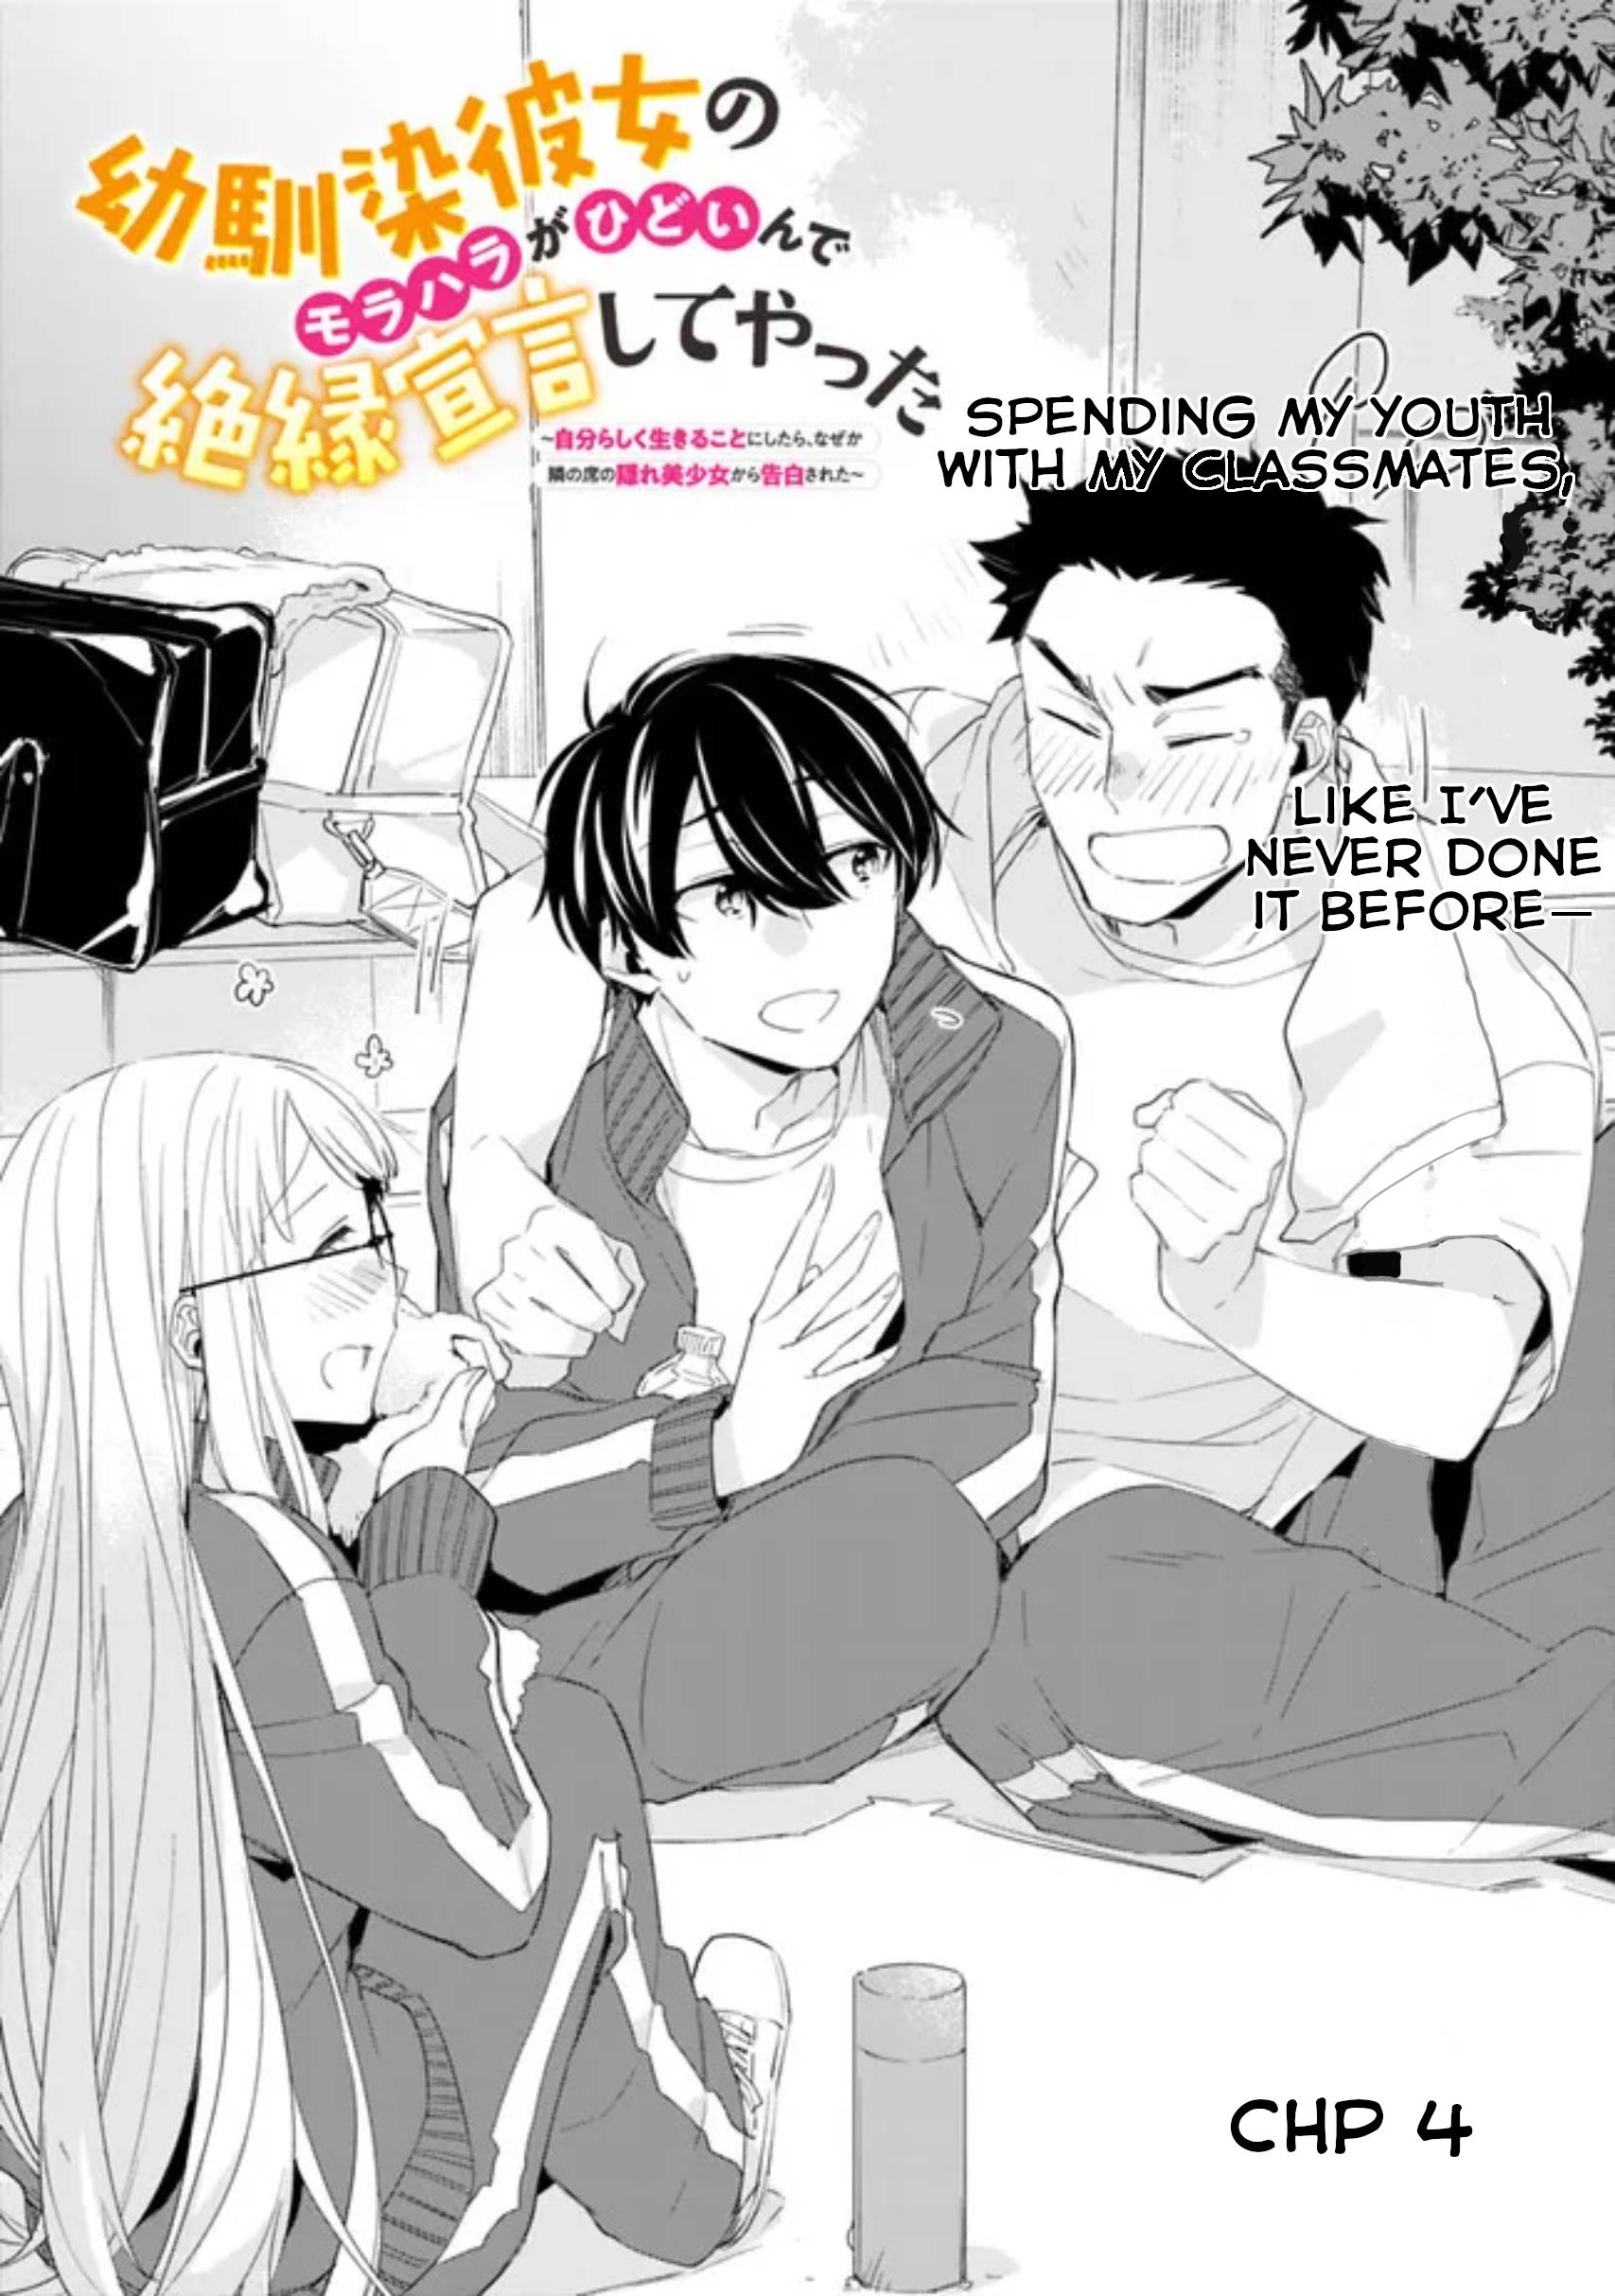 I’M Sick And Tired Of My Childhood Friend’S, Now Girlfriend’S, Constant Abuse So I Broke Up With Her - chapter 4.1 - #2